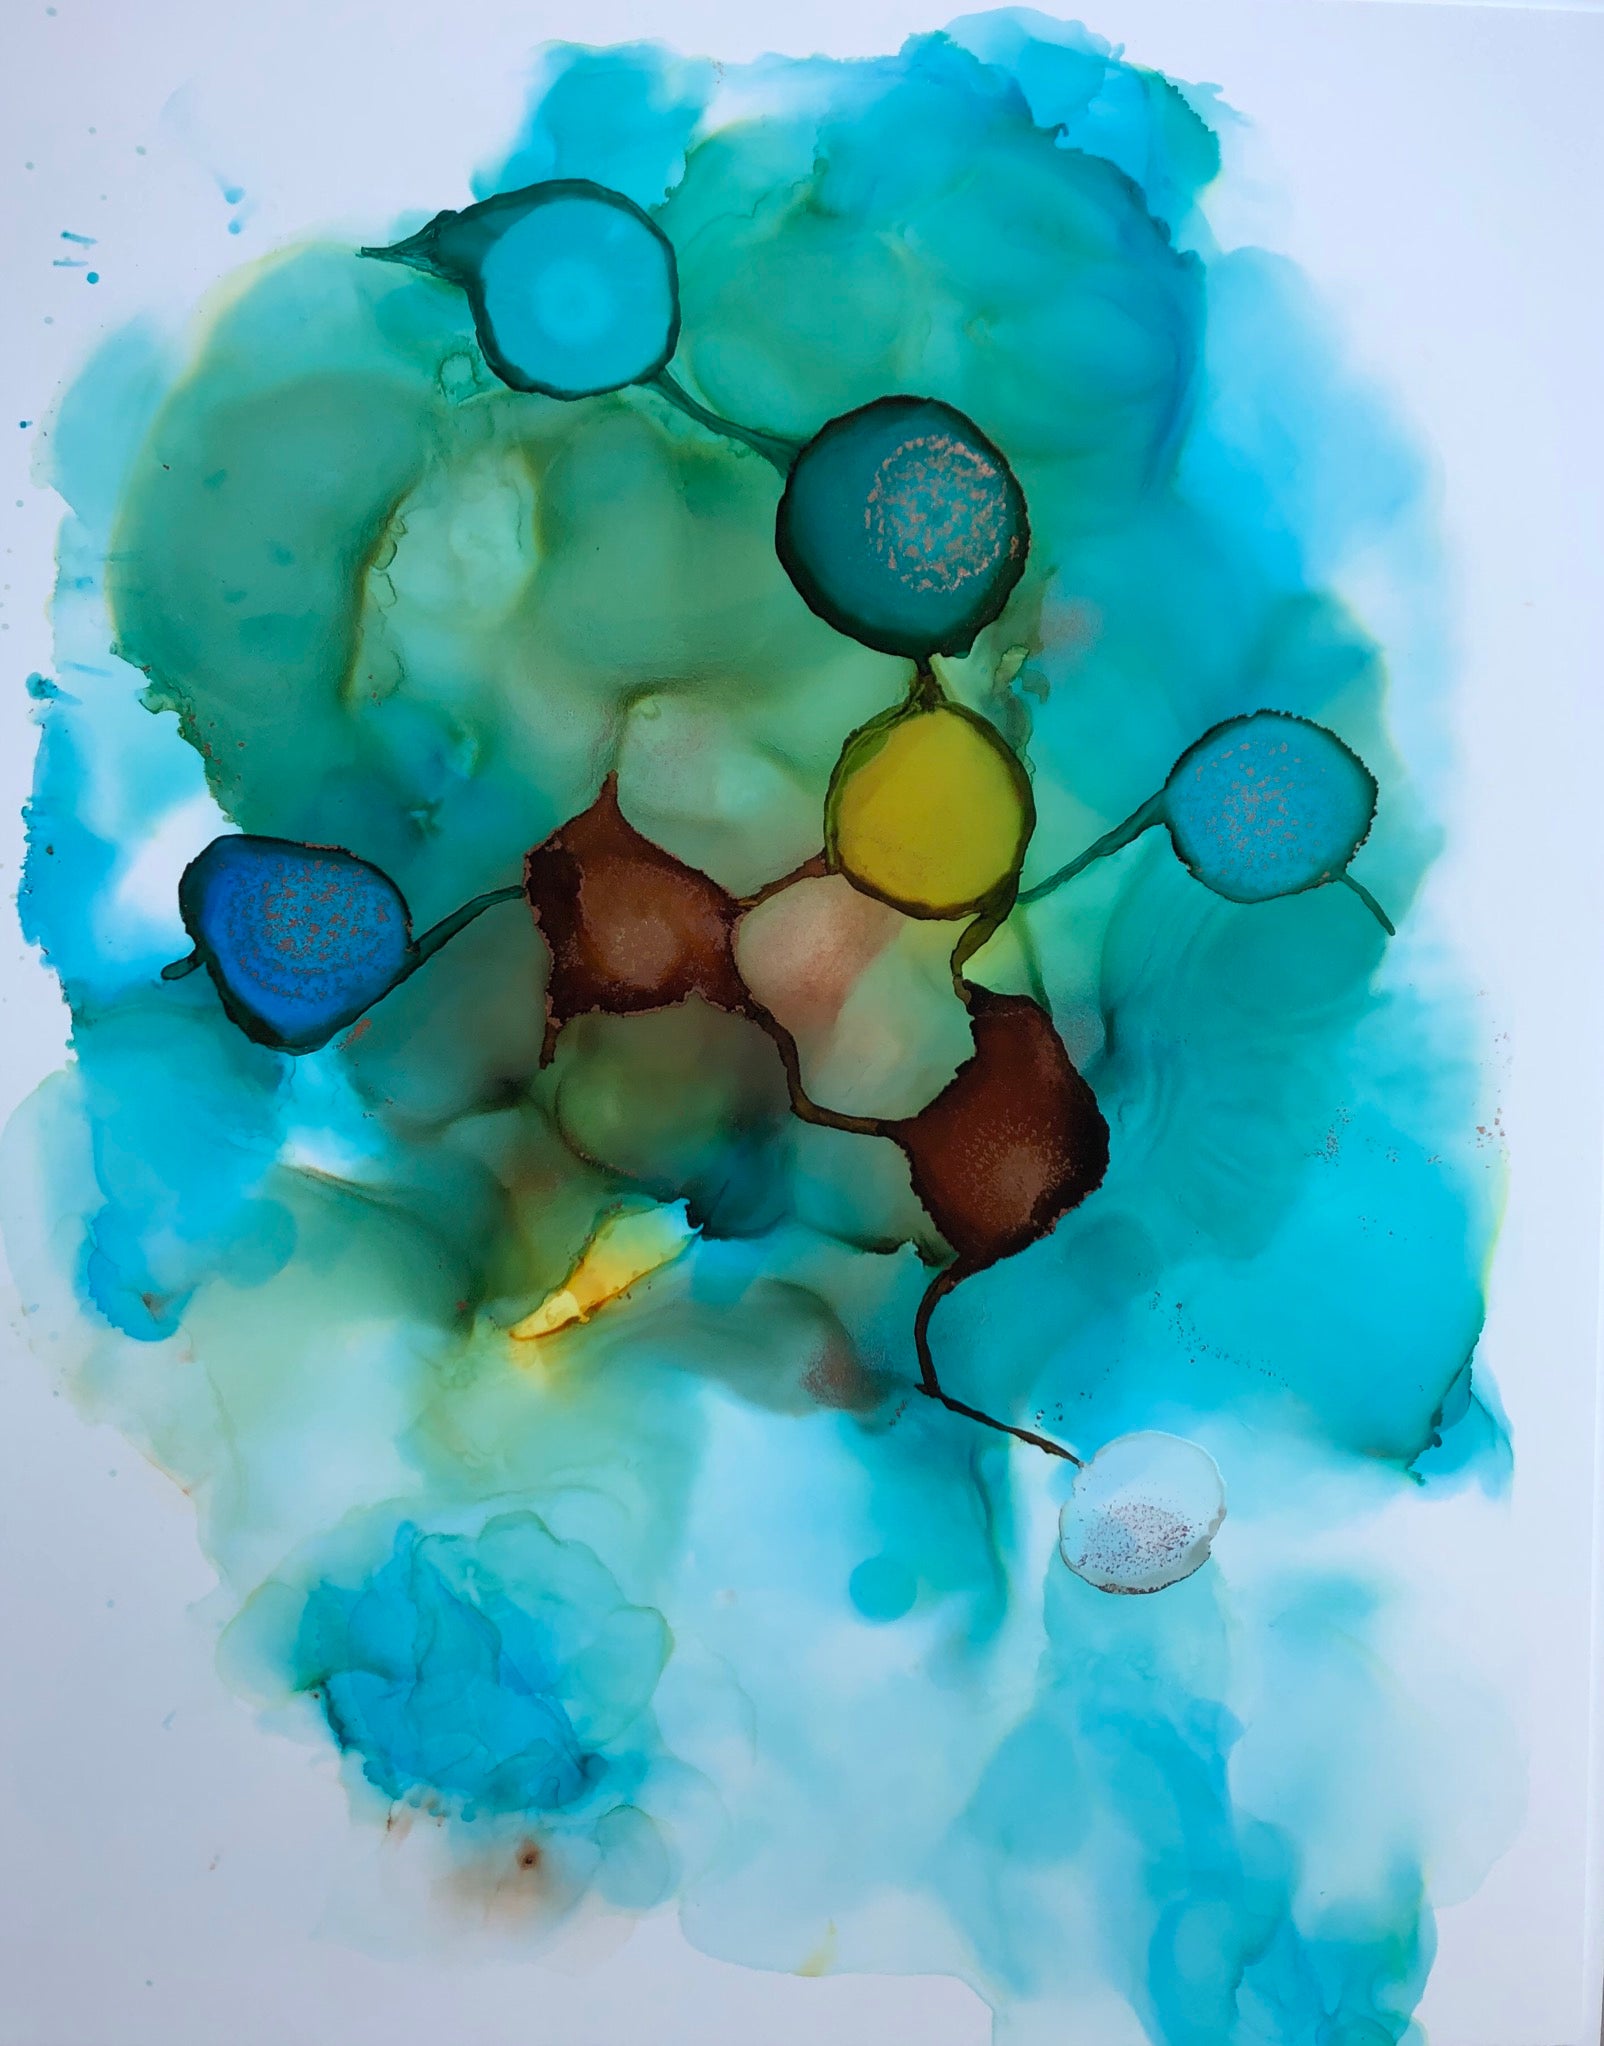 Creating Art with Alcohol Inks  Continuing Education at University of  Wisconsin-Eau Claire